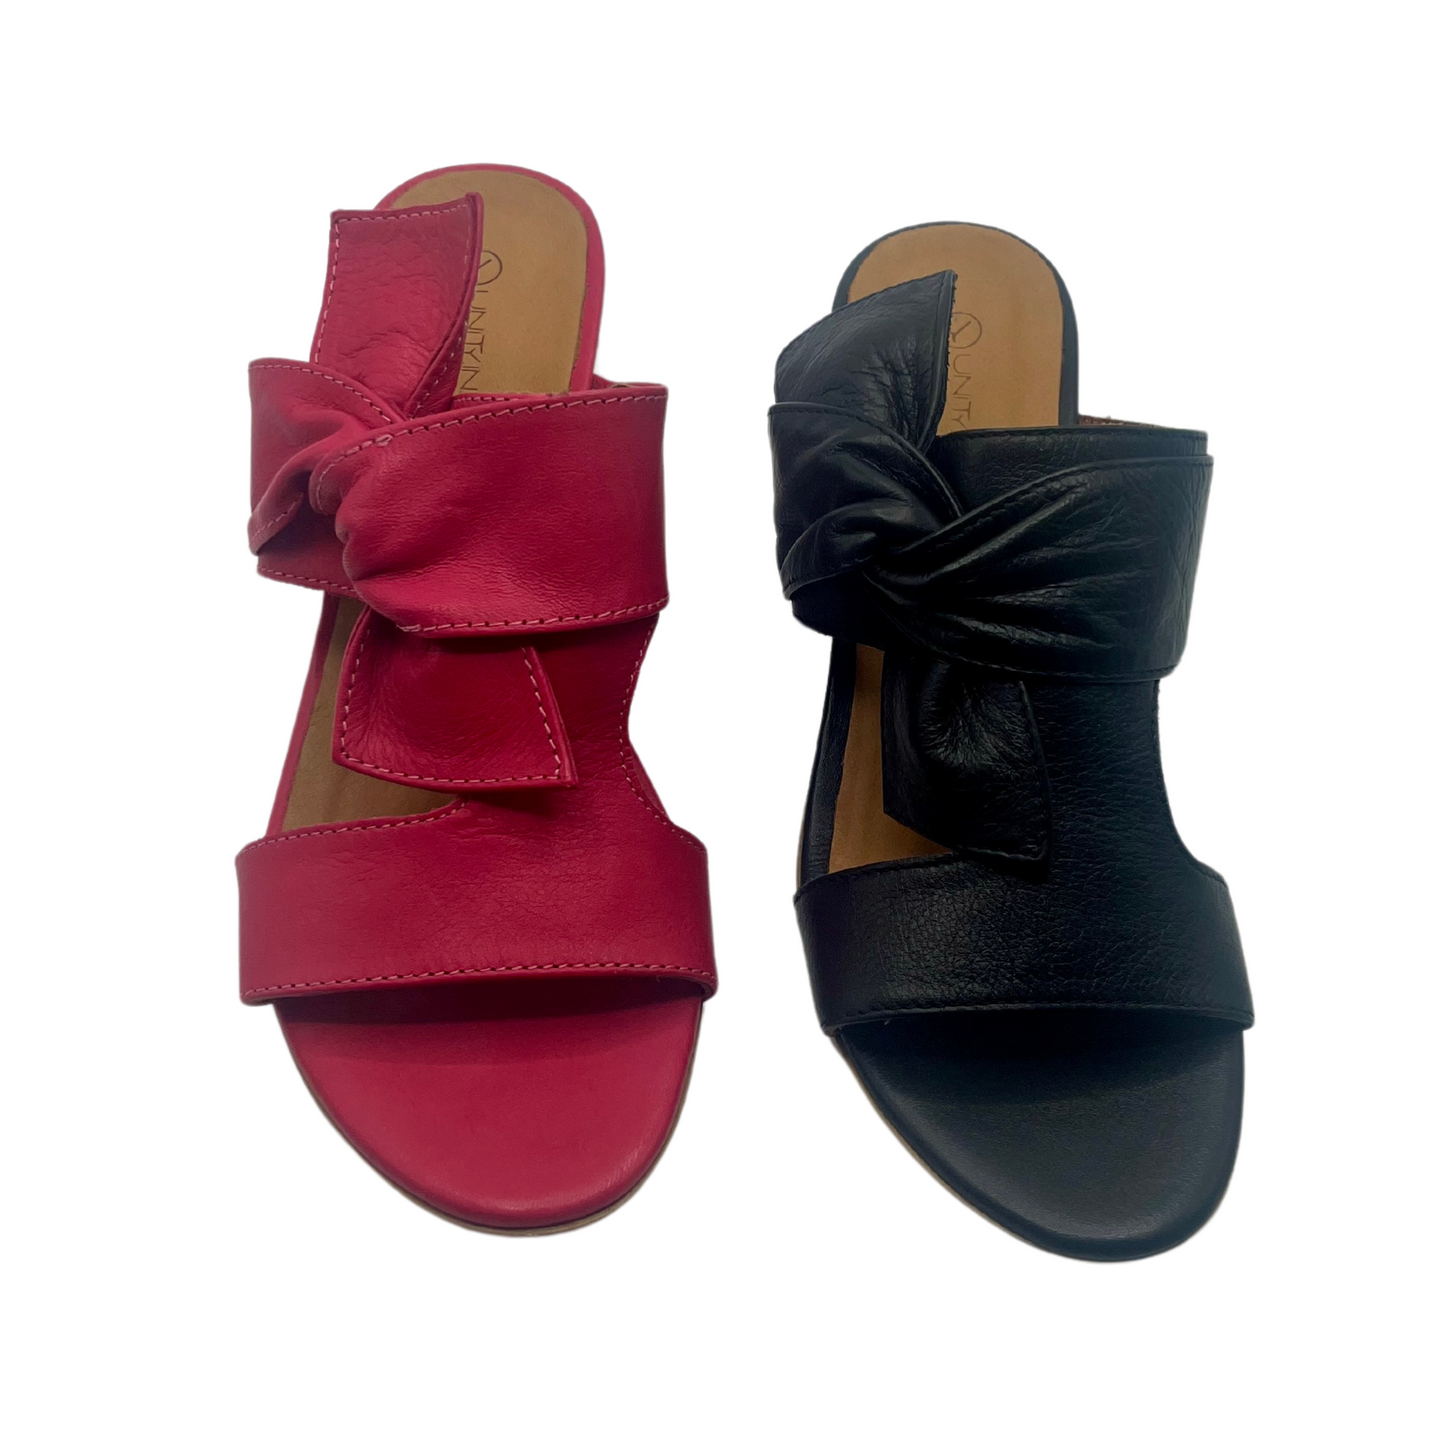 Top view of two leather sandals side by side. One is fuchsia pink leather and one is black leather. Both have a block heel, peep toe and knot detail on upper.